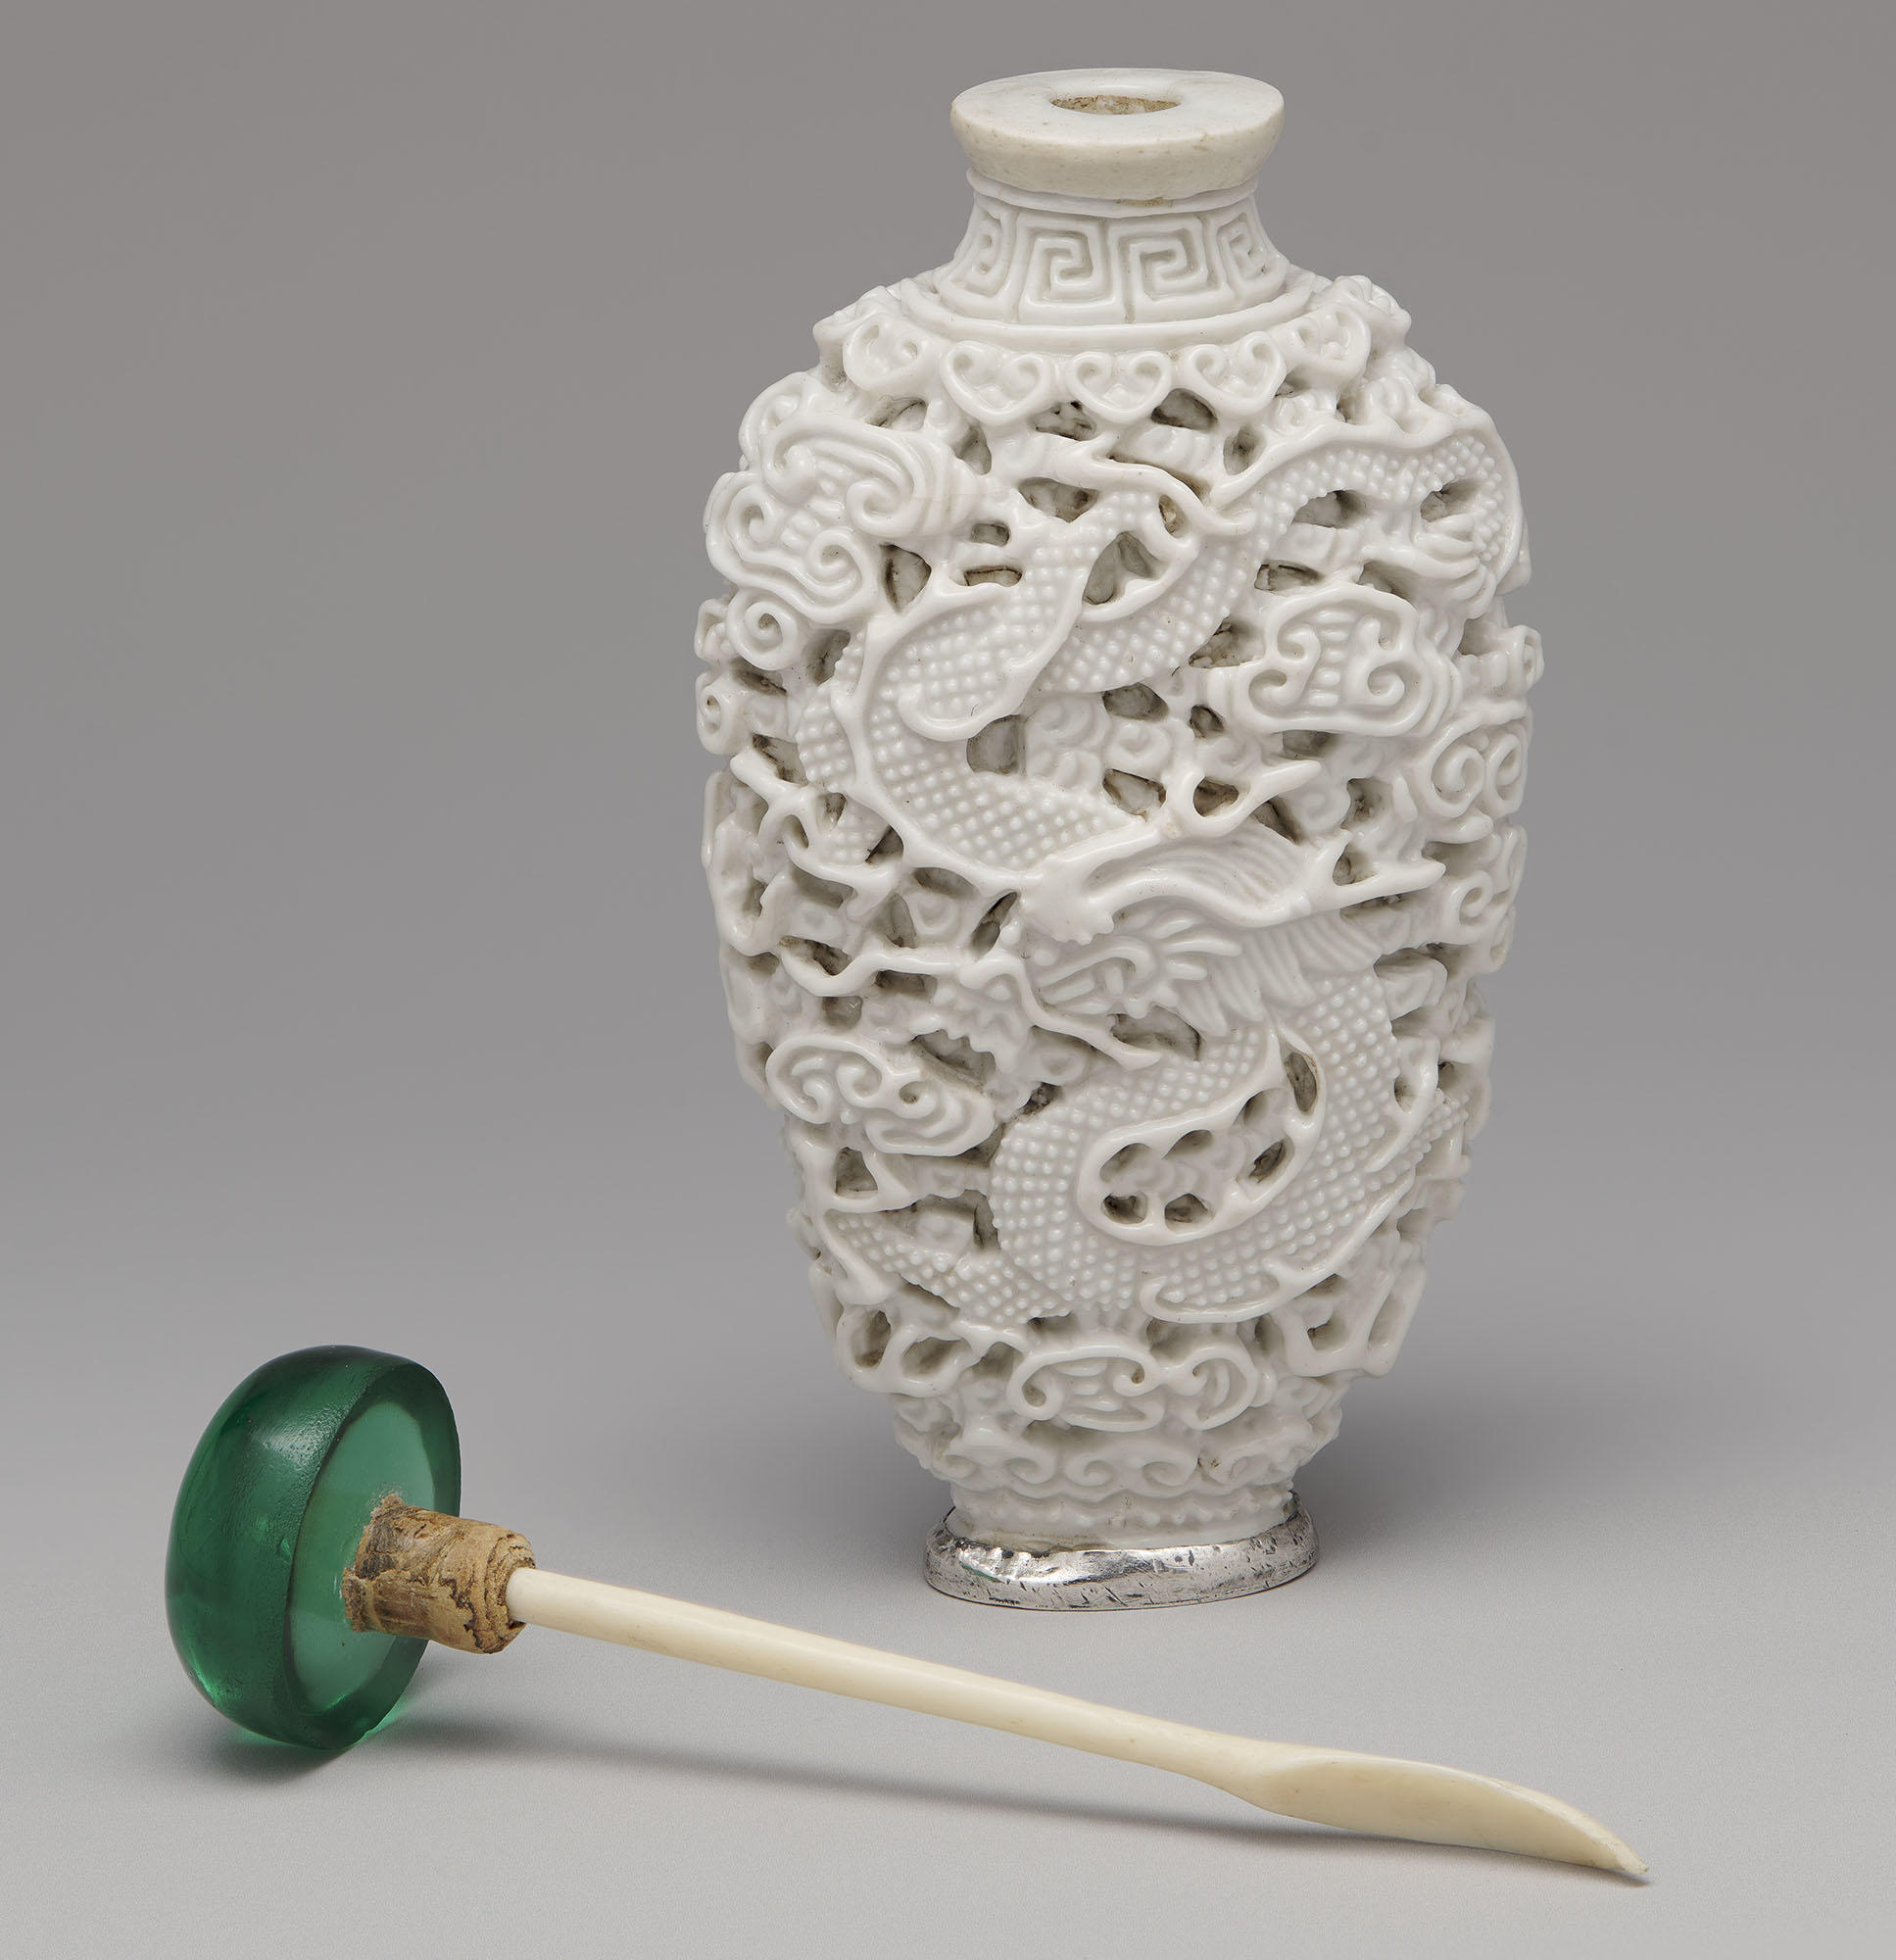 An oval-shaped white snuff bottle, with a silver rimmed foot, with the green stopper laying next to the bottle. The green stopper has a bone spoon attached to it. Carved into the surface of the bottle is a dragon among clouds. 